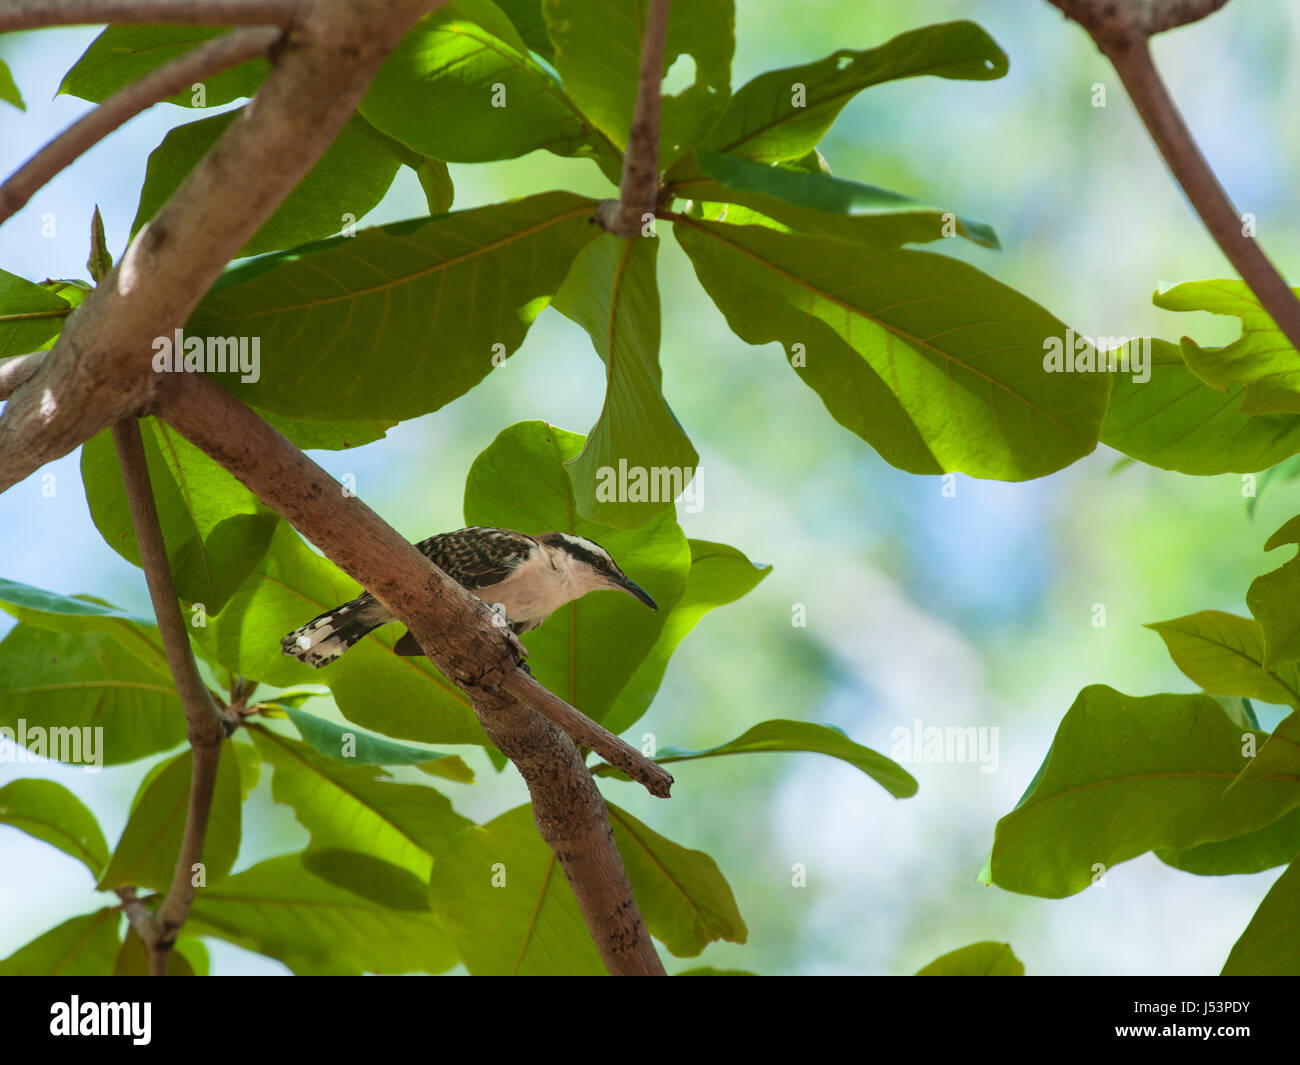 Rufous-naped wren sits on a branch in an almond tree Stock Photo